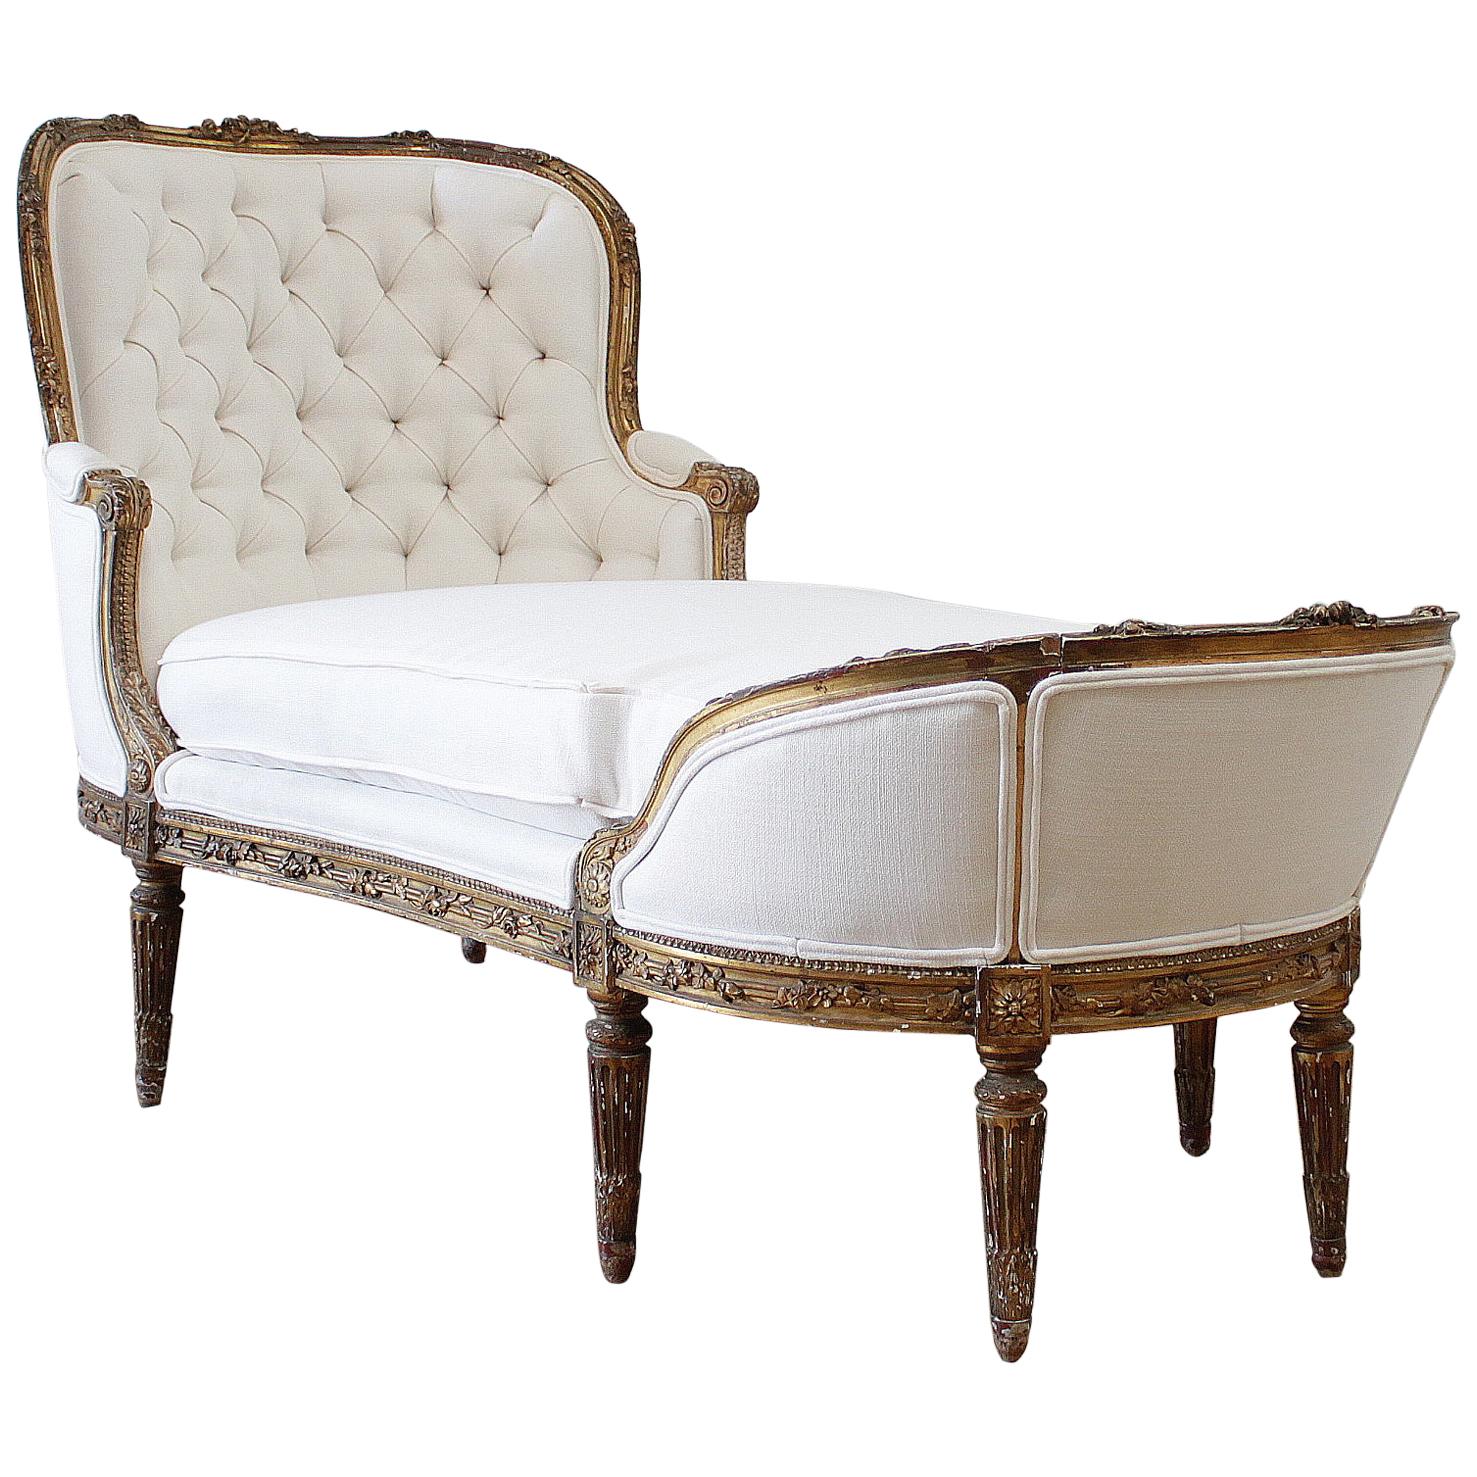 Early 20th Century Carved Giltwood Chaise Lounge with Roses